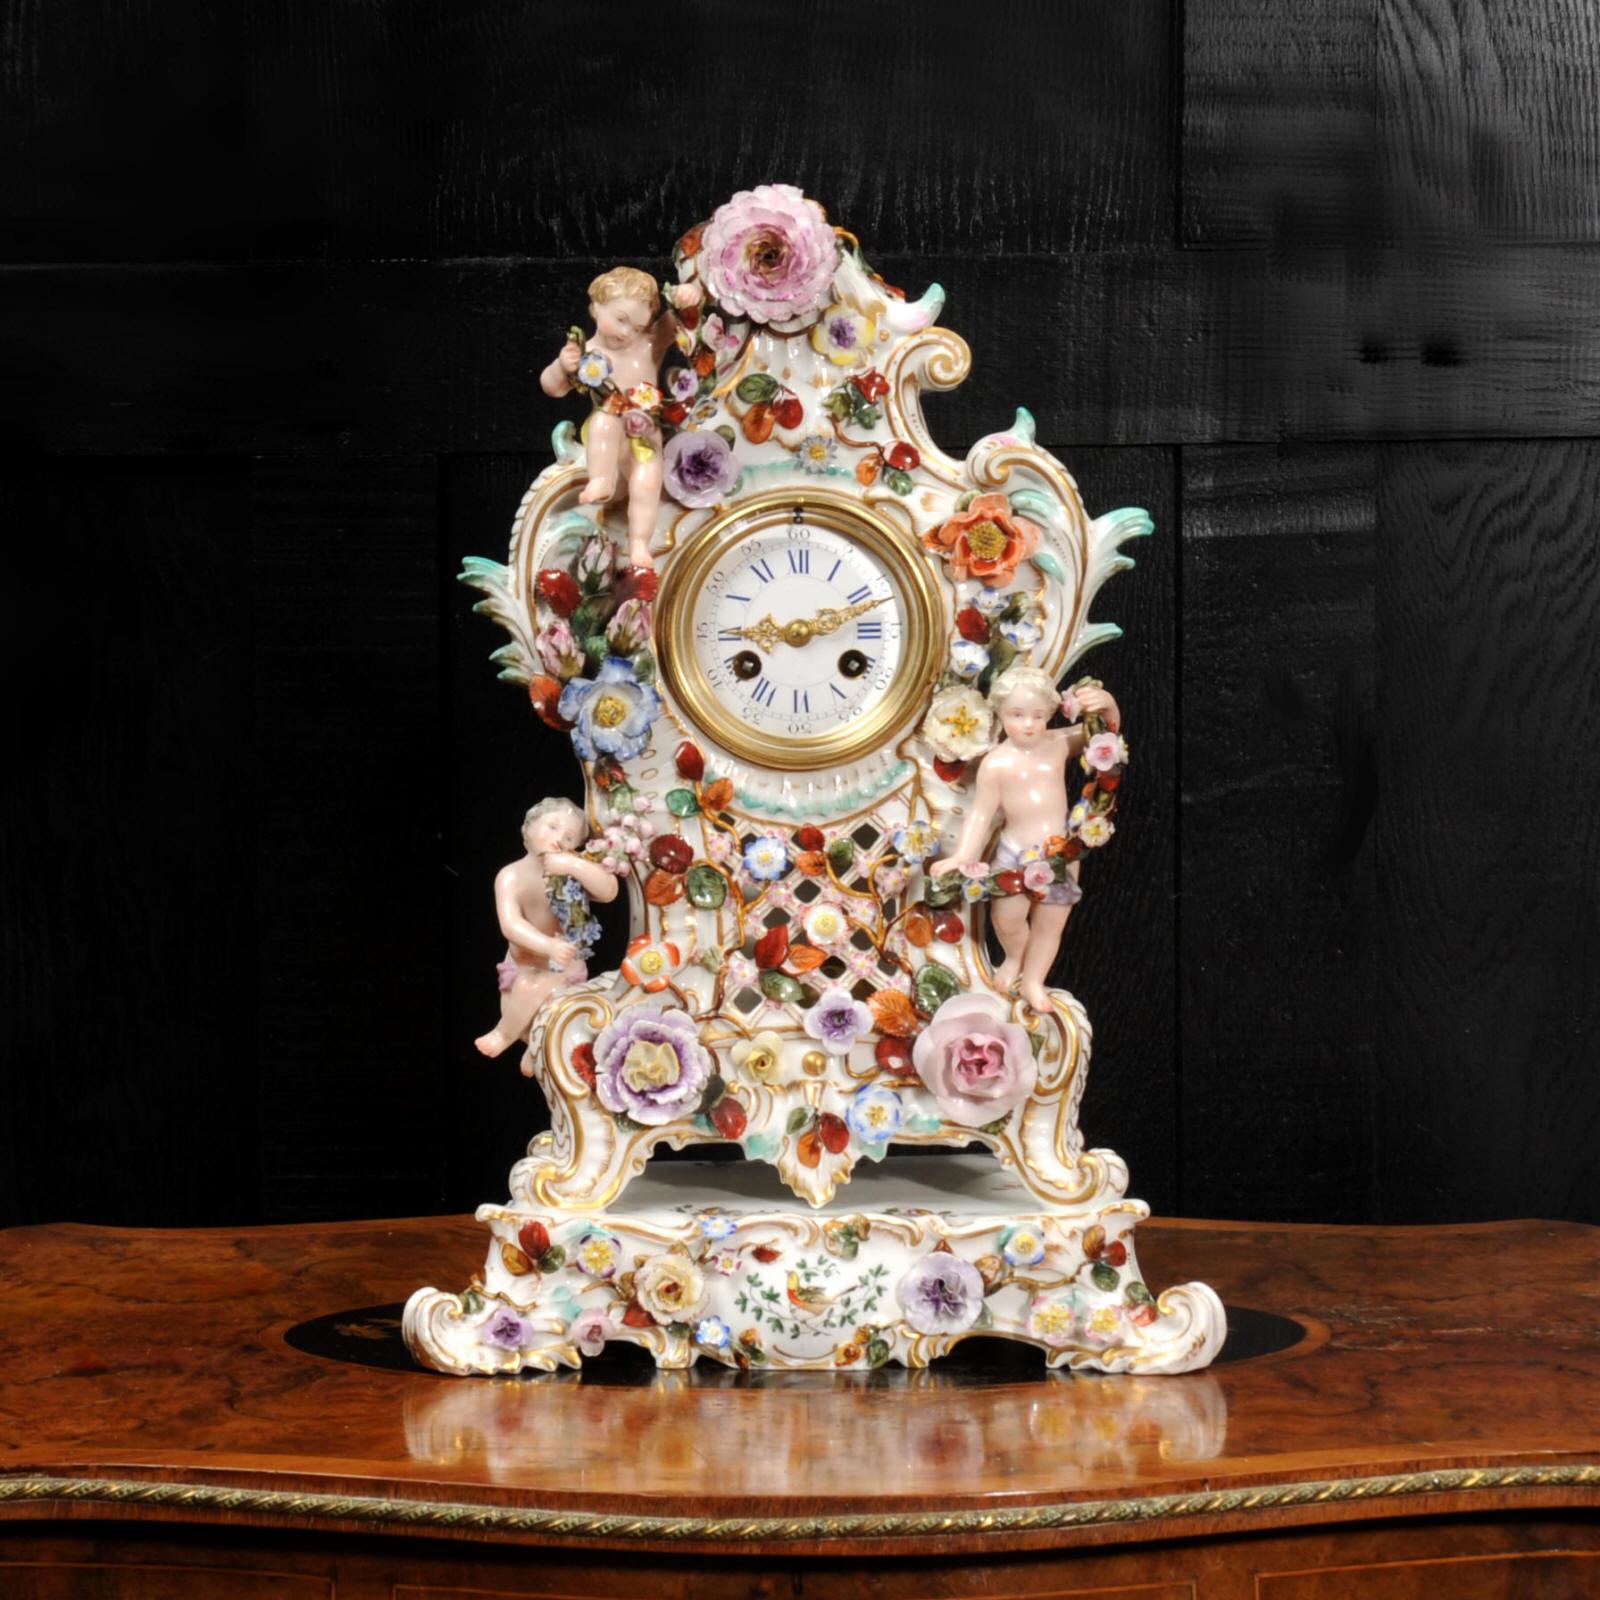 A beautiful antique French clock of exquisite Meissen style porcelain in the Louis XV Rococo style. The case is of waisted shape with bold scrolls sitting upon a base. Three charming putti hold fine floral swags and the case is profusely decorated